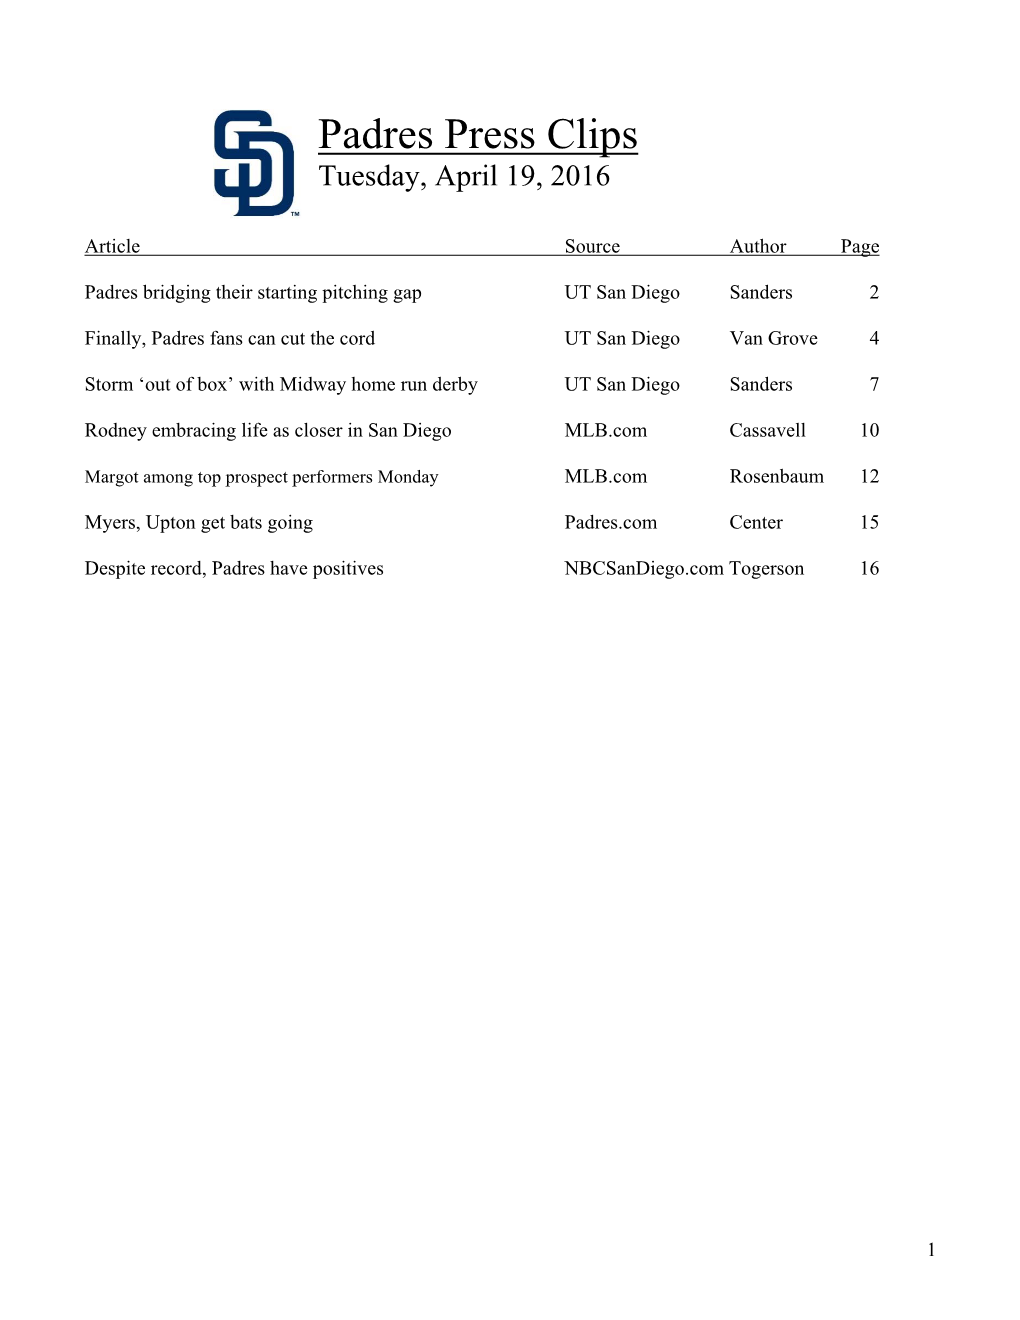 Padres Press Clips Tuesday, April 19, 2016